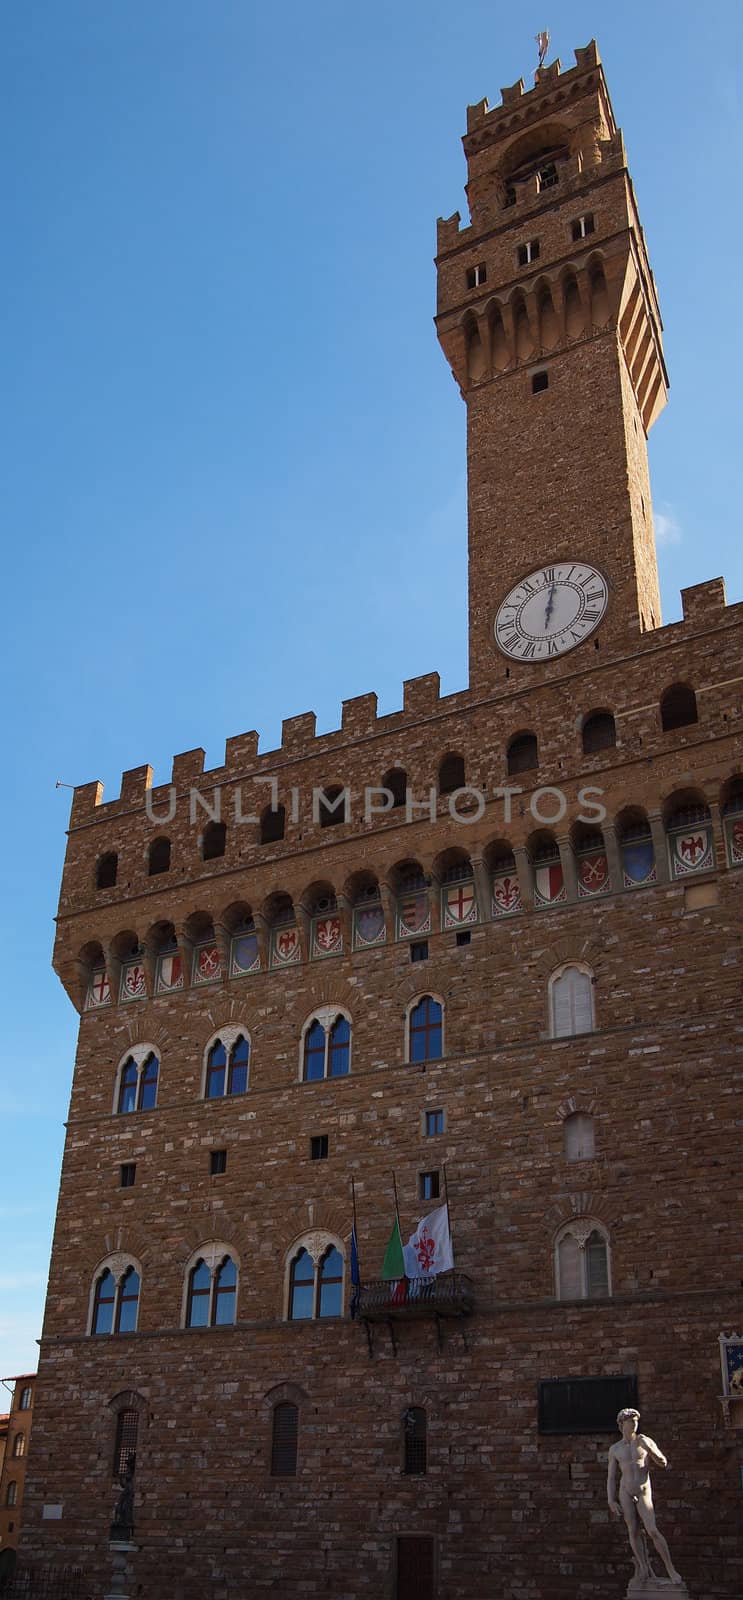 Palazzo Vecchio with the statue of David in Florence, Italy.